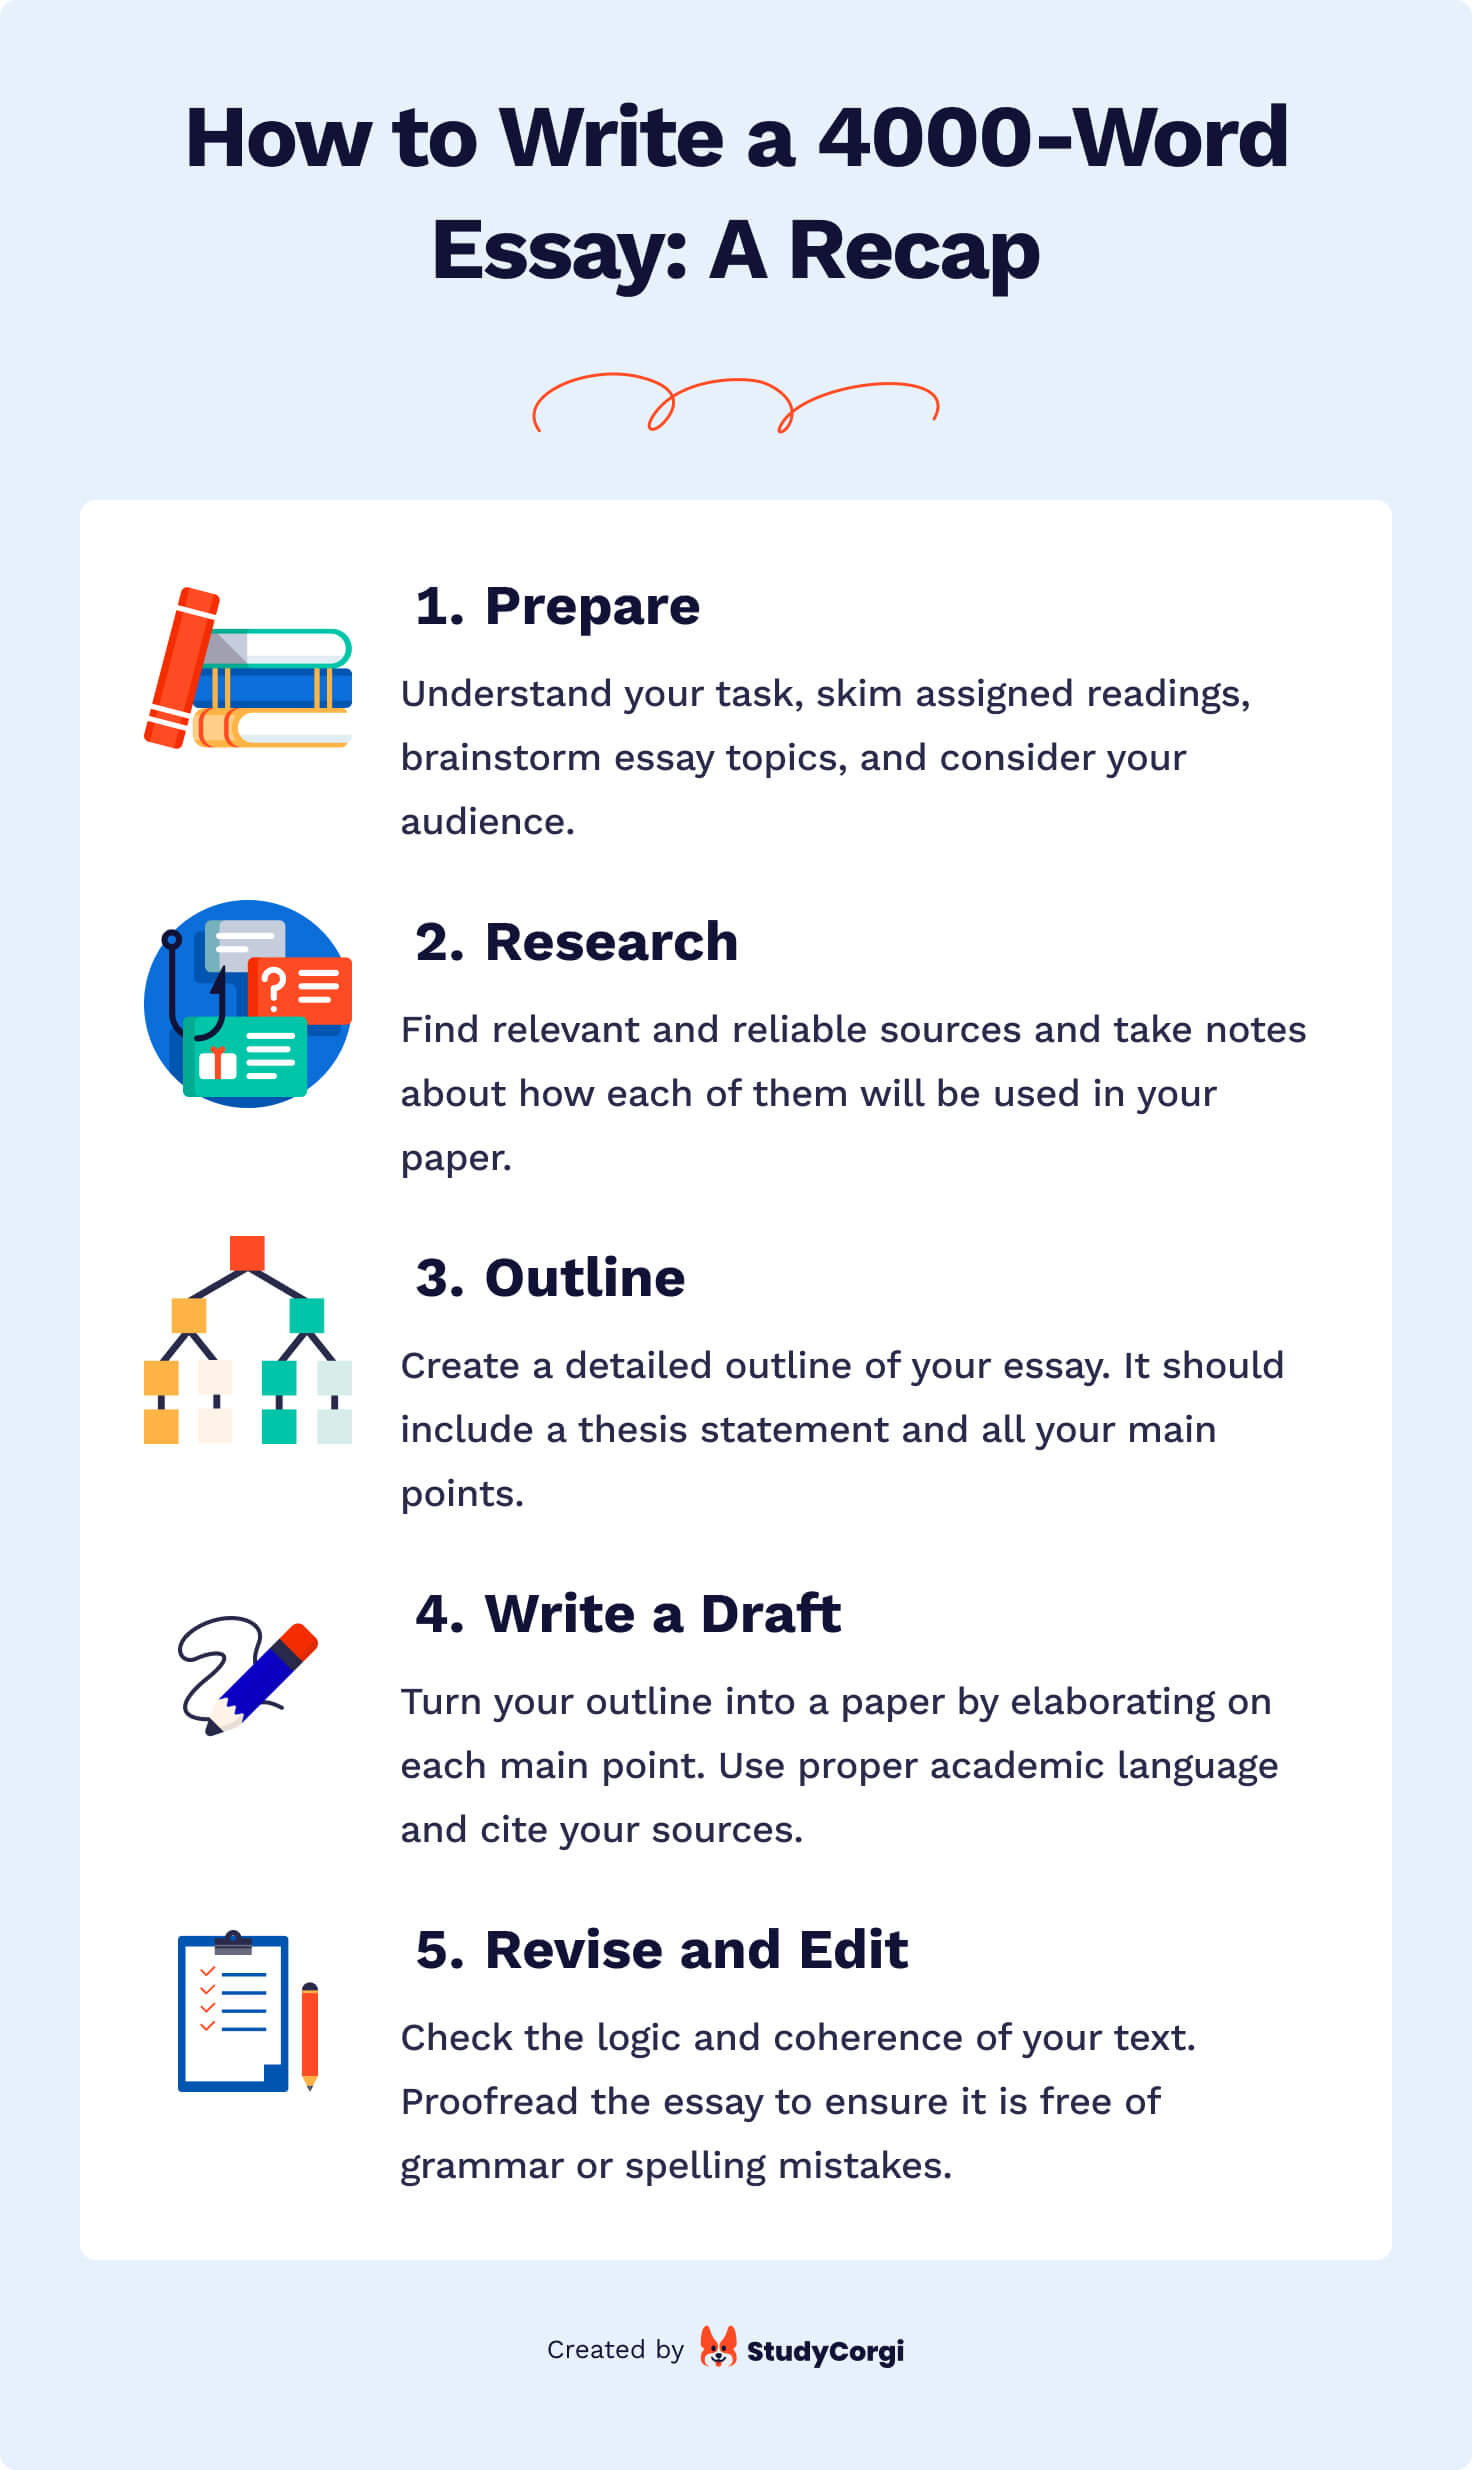 how to structure 4000 word essay